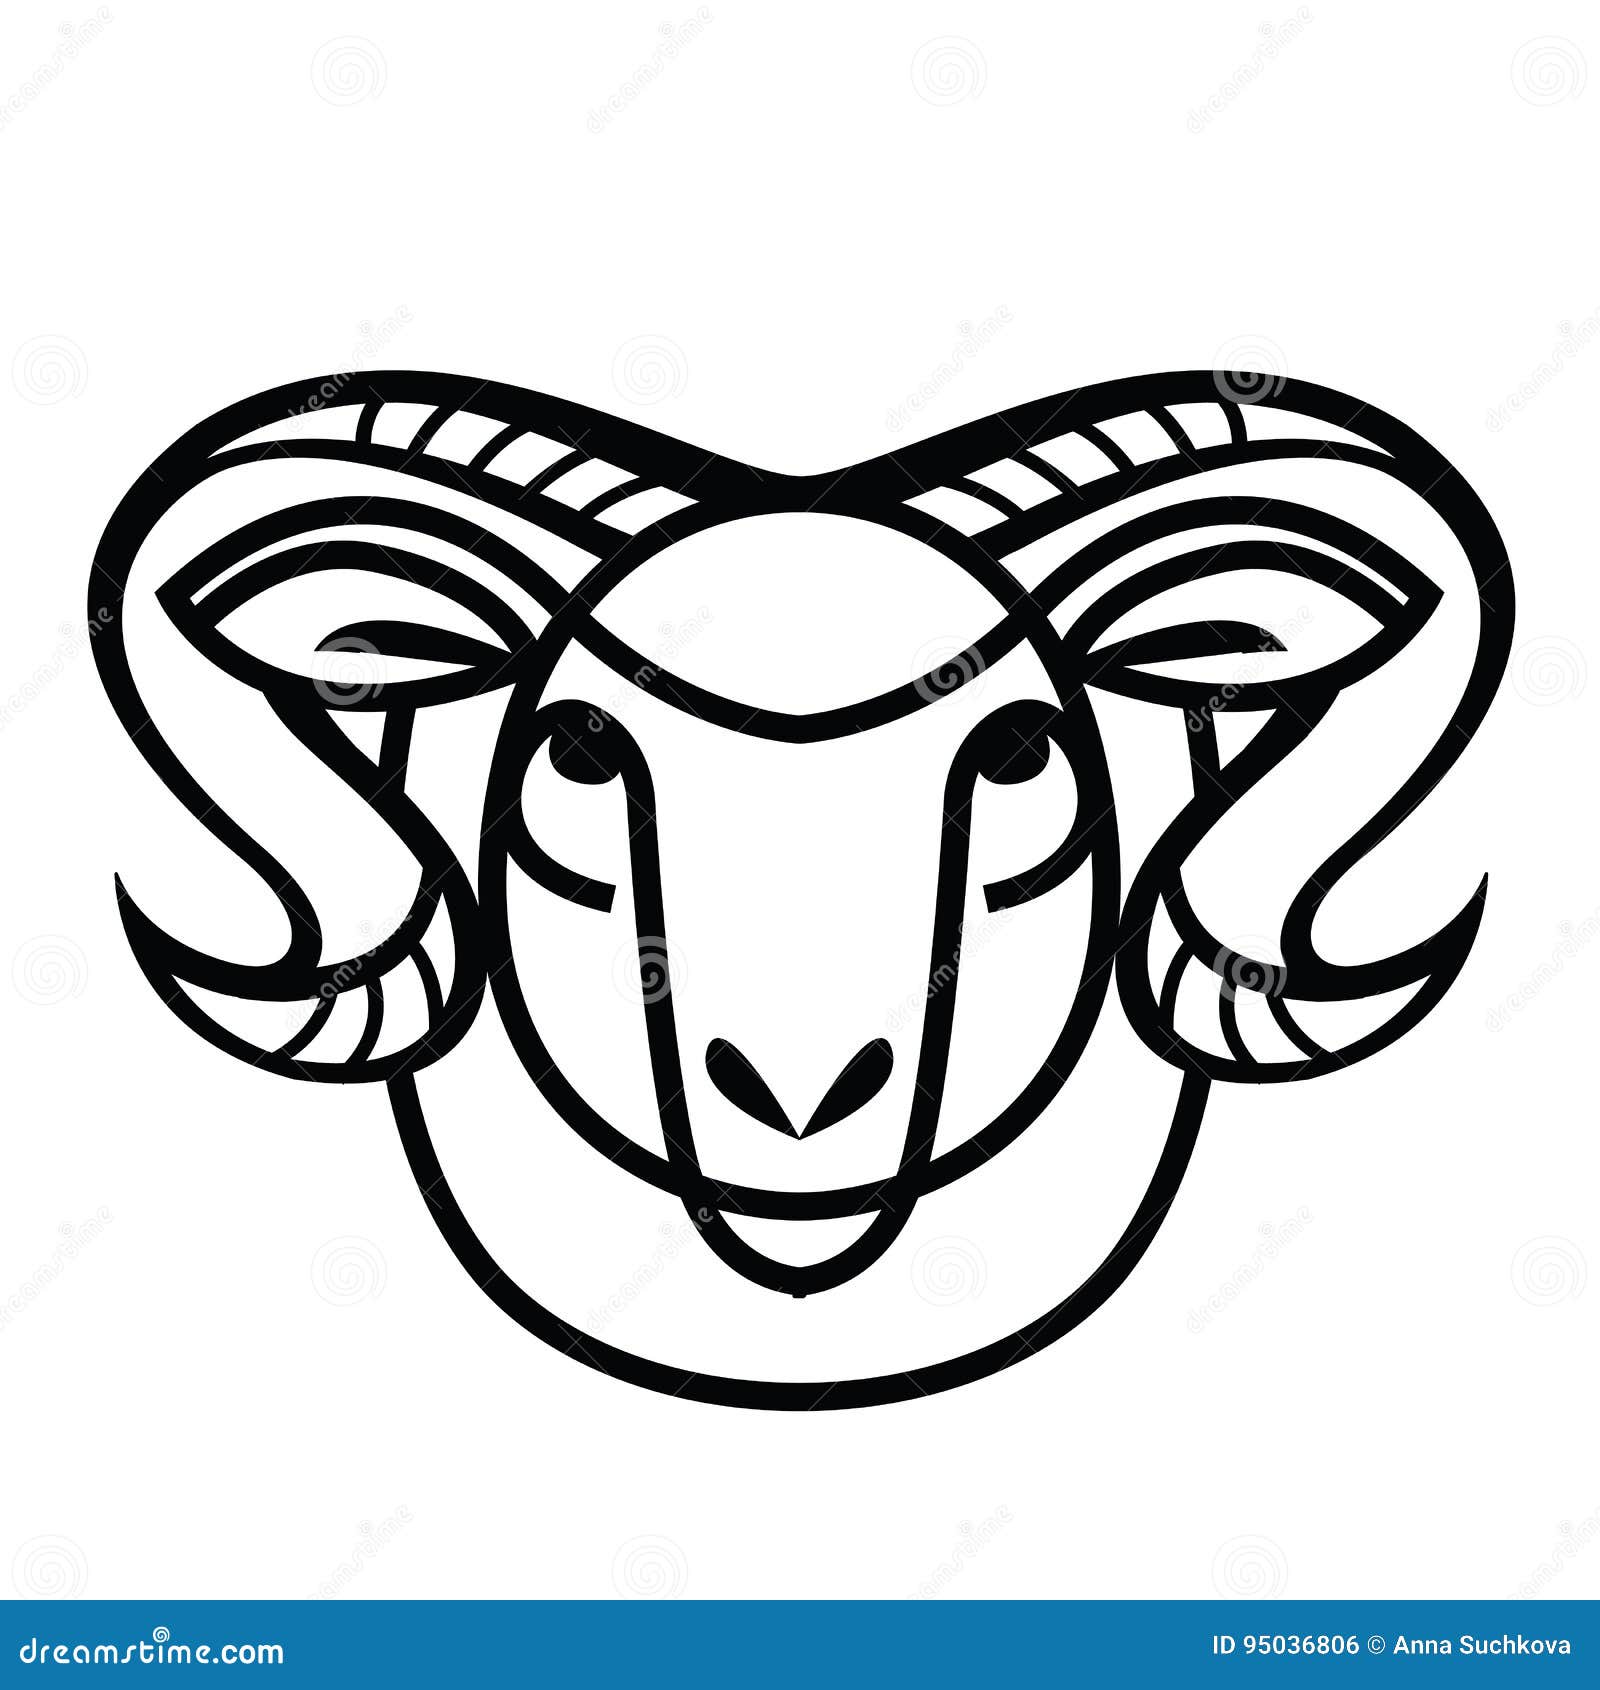 Linear Stylized Drawing - Head of Sheep or Ram Stock Vector ...